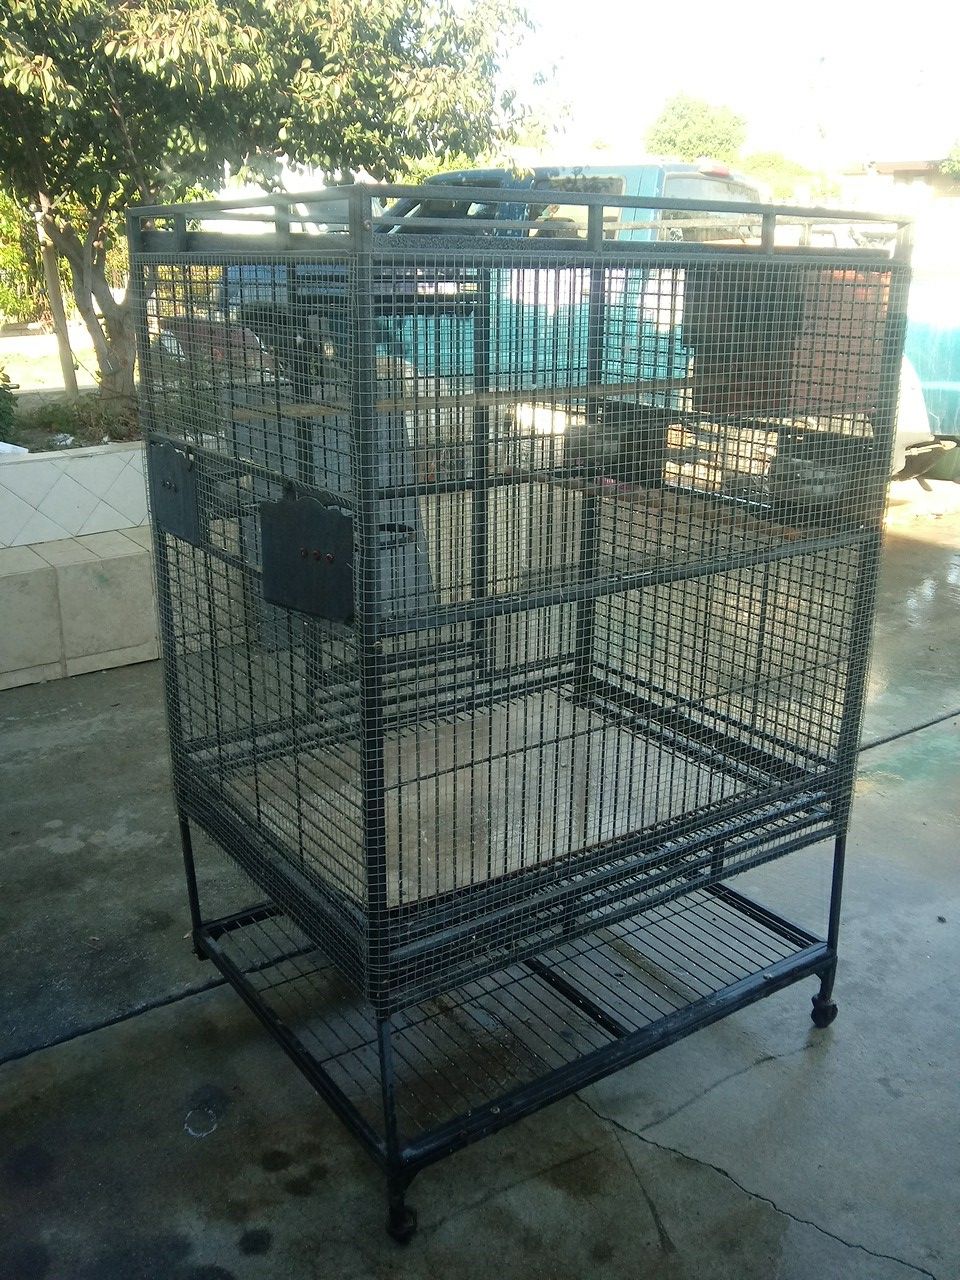 Big bird cage bout 4 feet tall and 3 feet wide